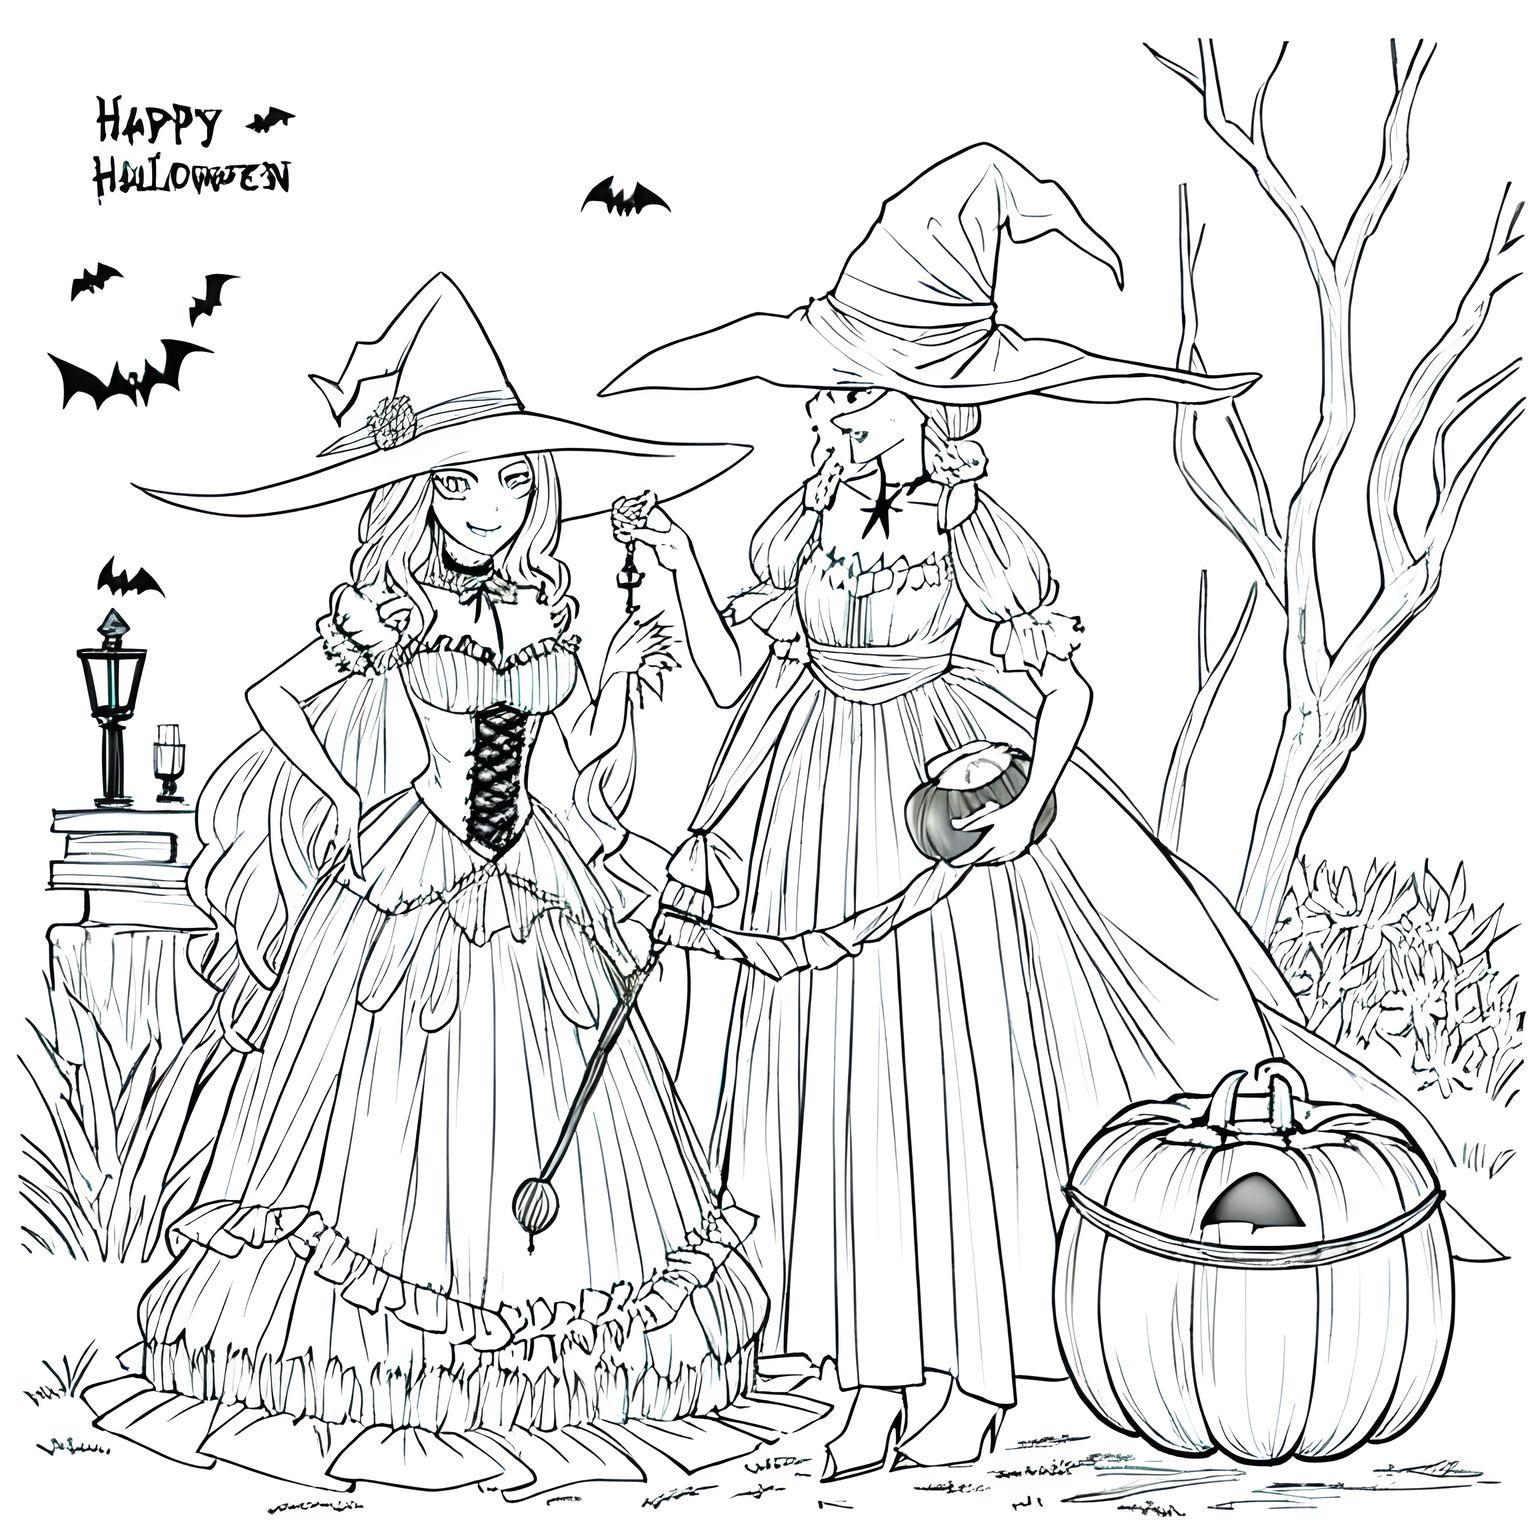 Halloween coloring pages free printable coloring pages